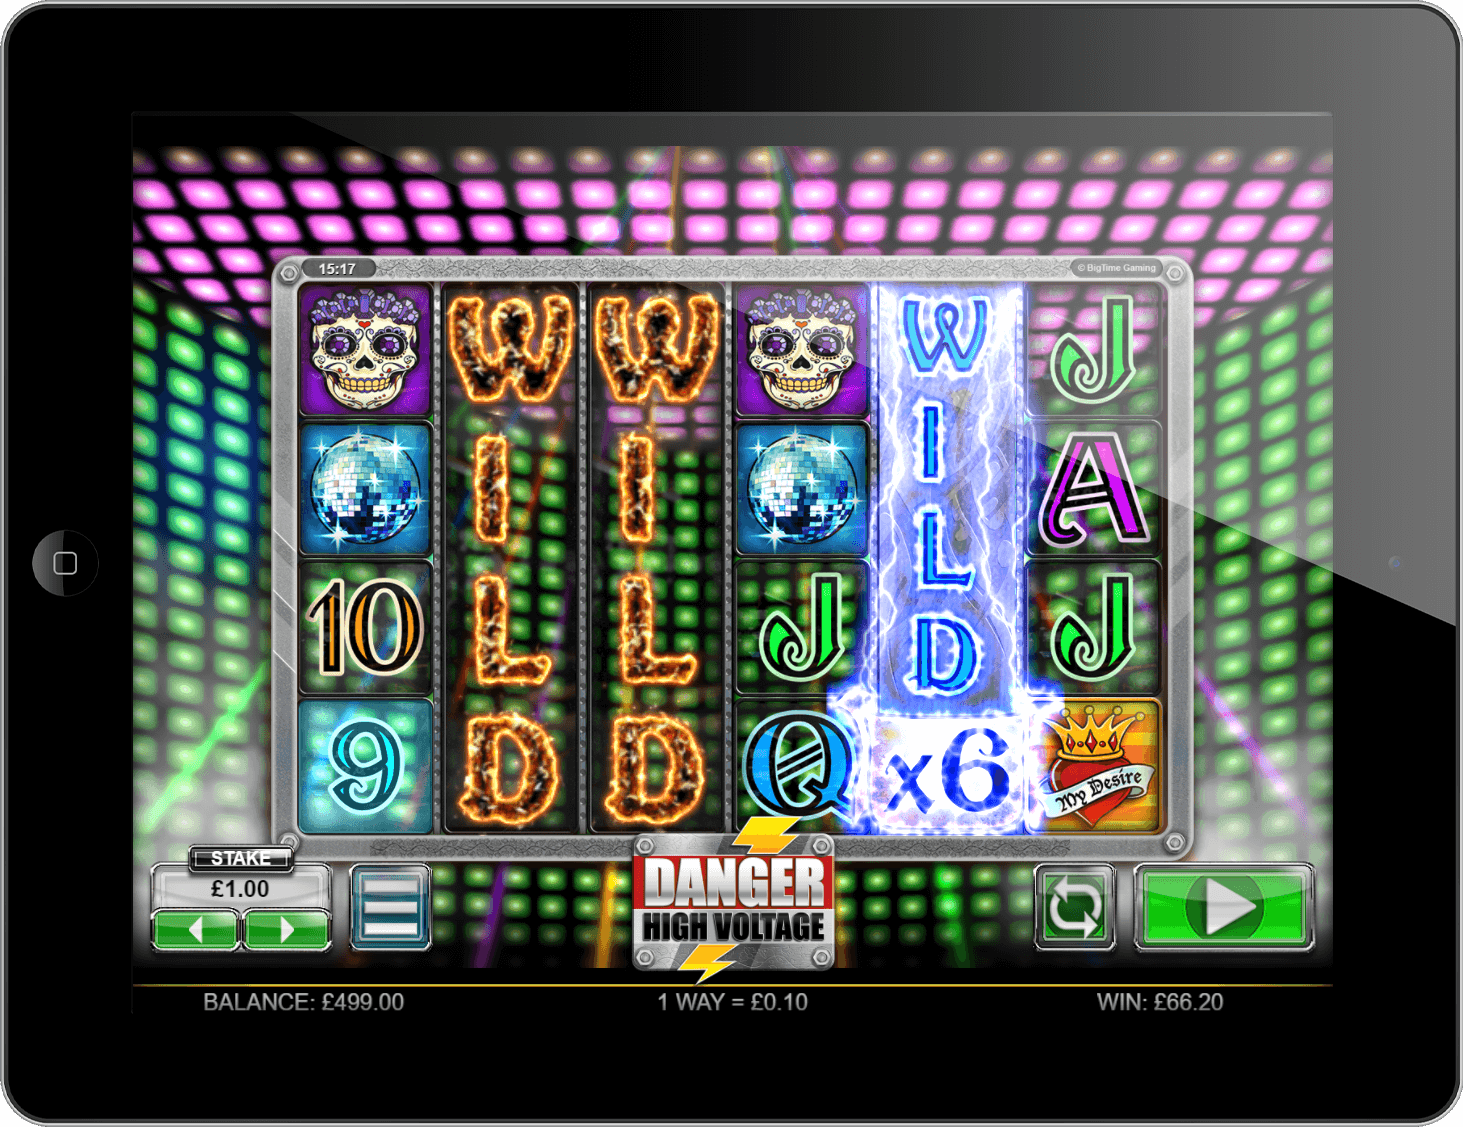 Experience the award-winning Danger! High Voltage slot on tablet at PlayOJO